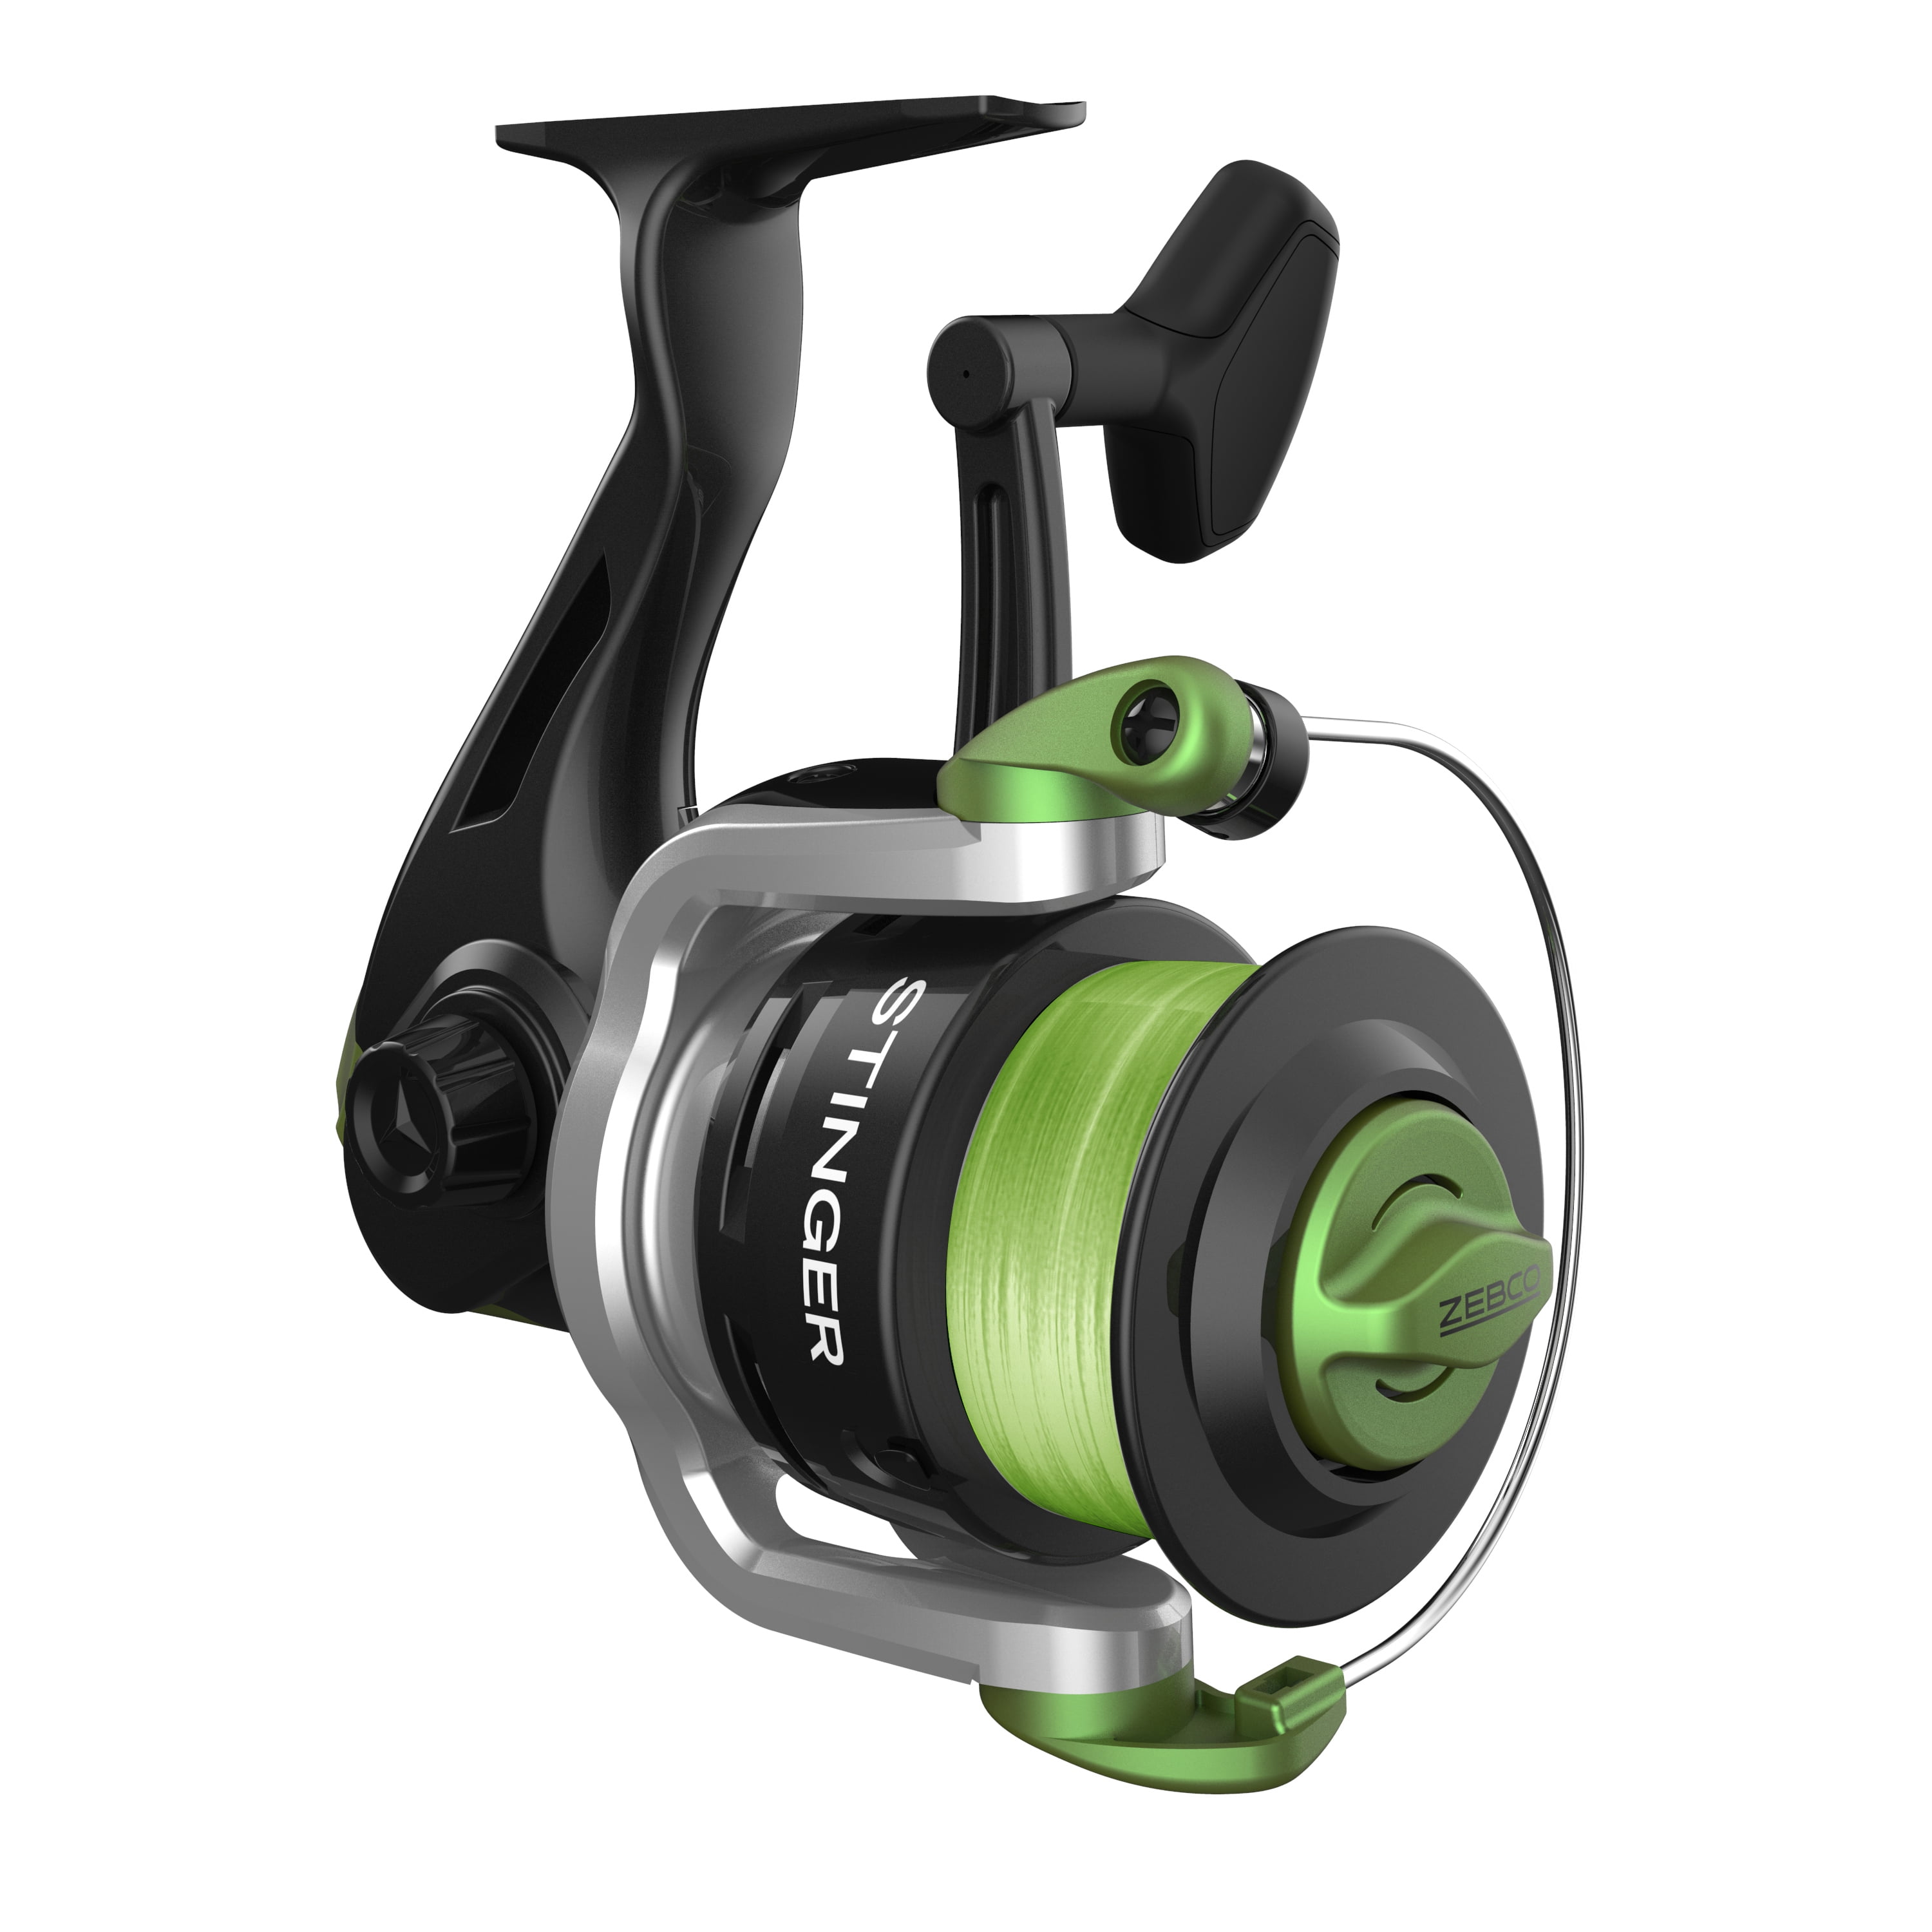 Zebco Stinger Spinning Fishing Reel, Size 80, Pre-Spooled 30-Pound